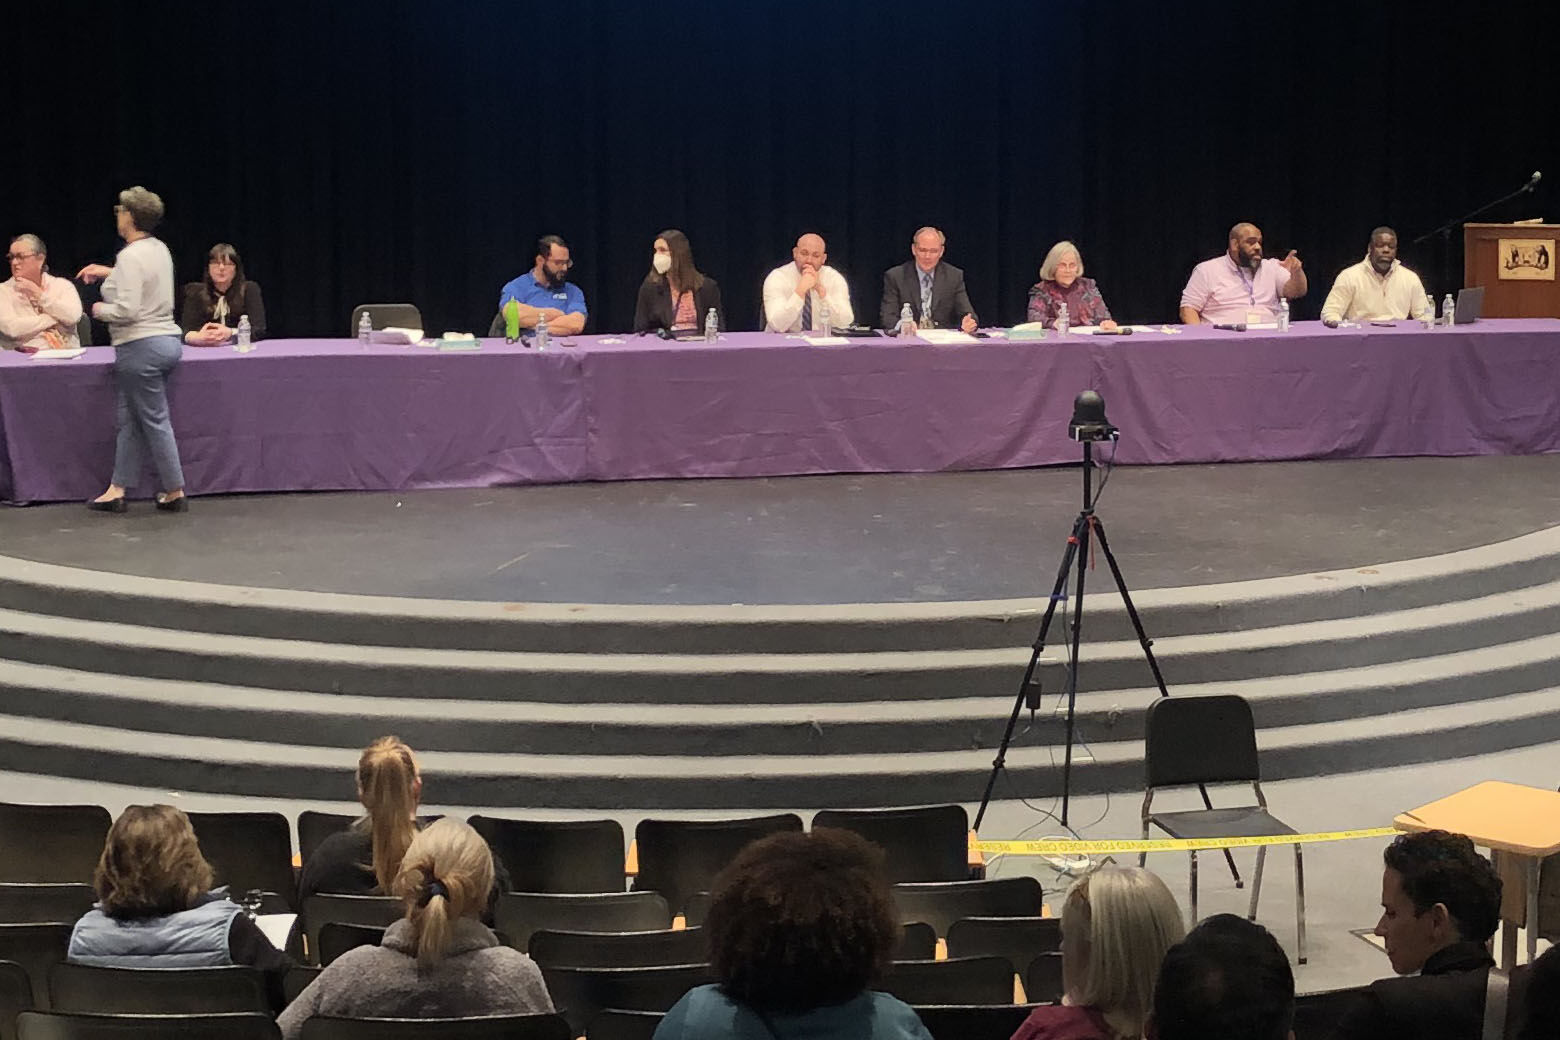 A community meeting where about 100 people head from a panel about the dangers of fentanyl held at Lake Braddock Secondary School in Burke, Virginia, on Tuesday, March 29, 2023.